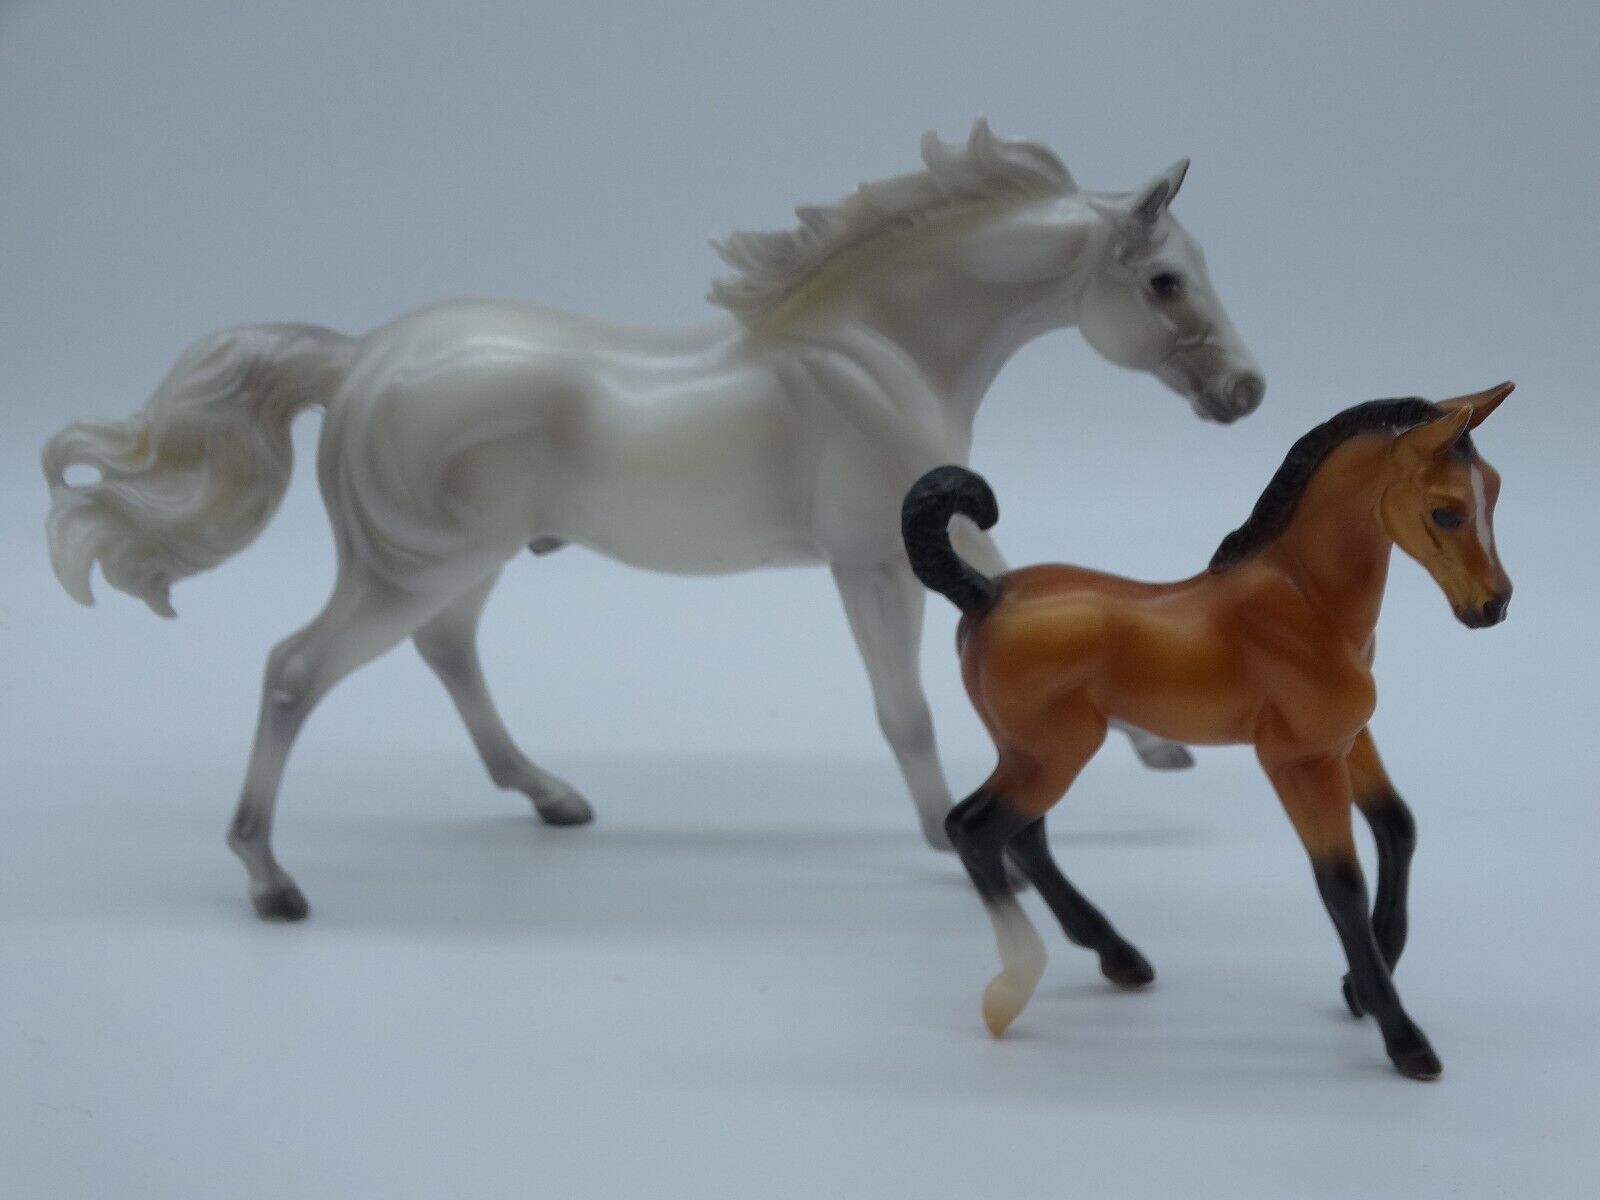 Breyer America's Wild Mustangs Freedom Series Quarter Horse And Foal Set Of 2